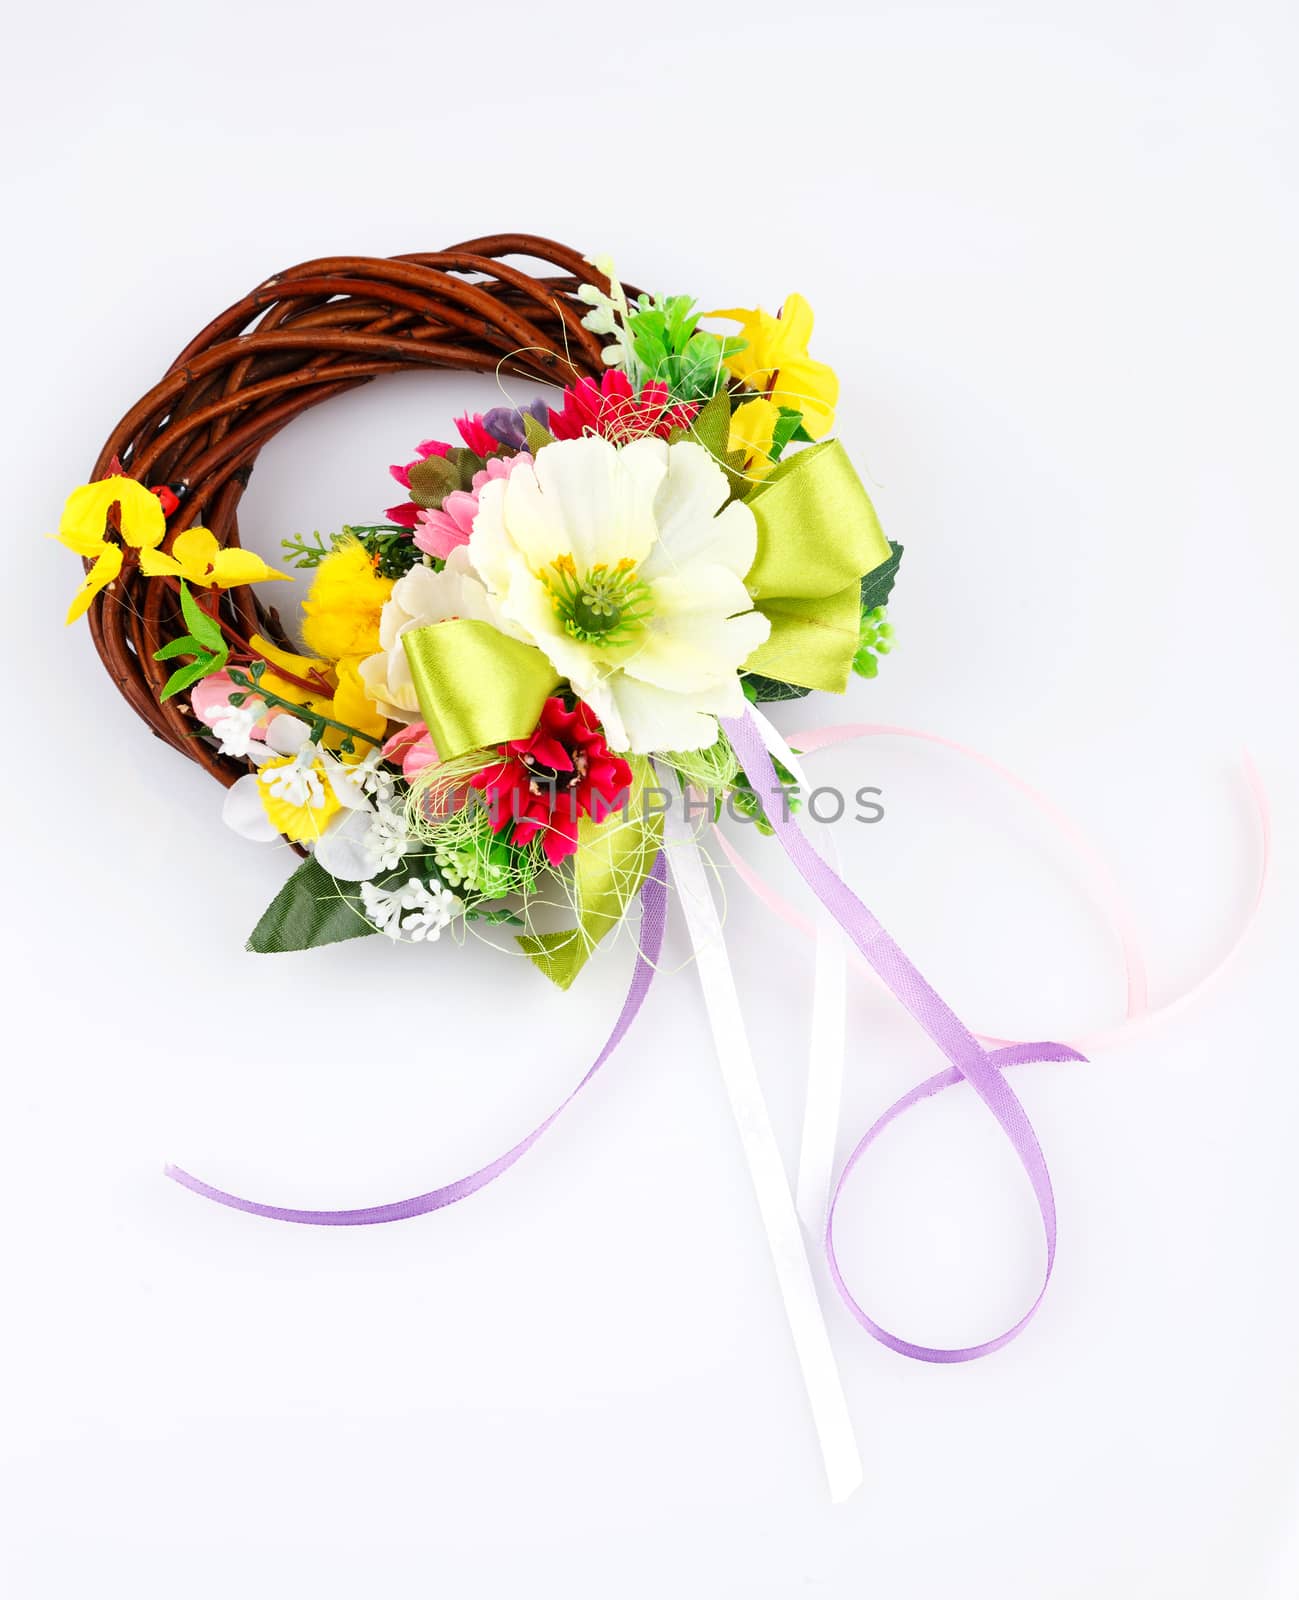 wreath of twigs and flower composition on a white background